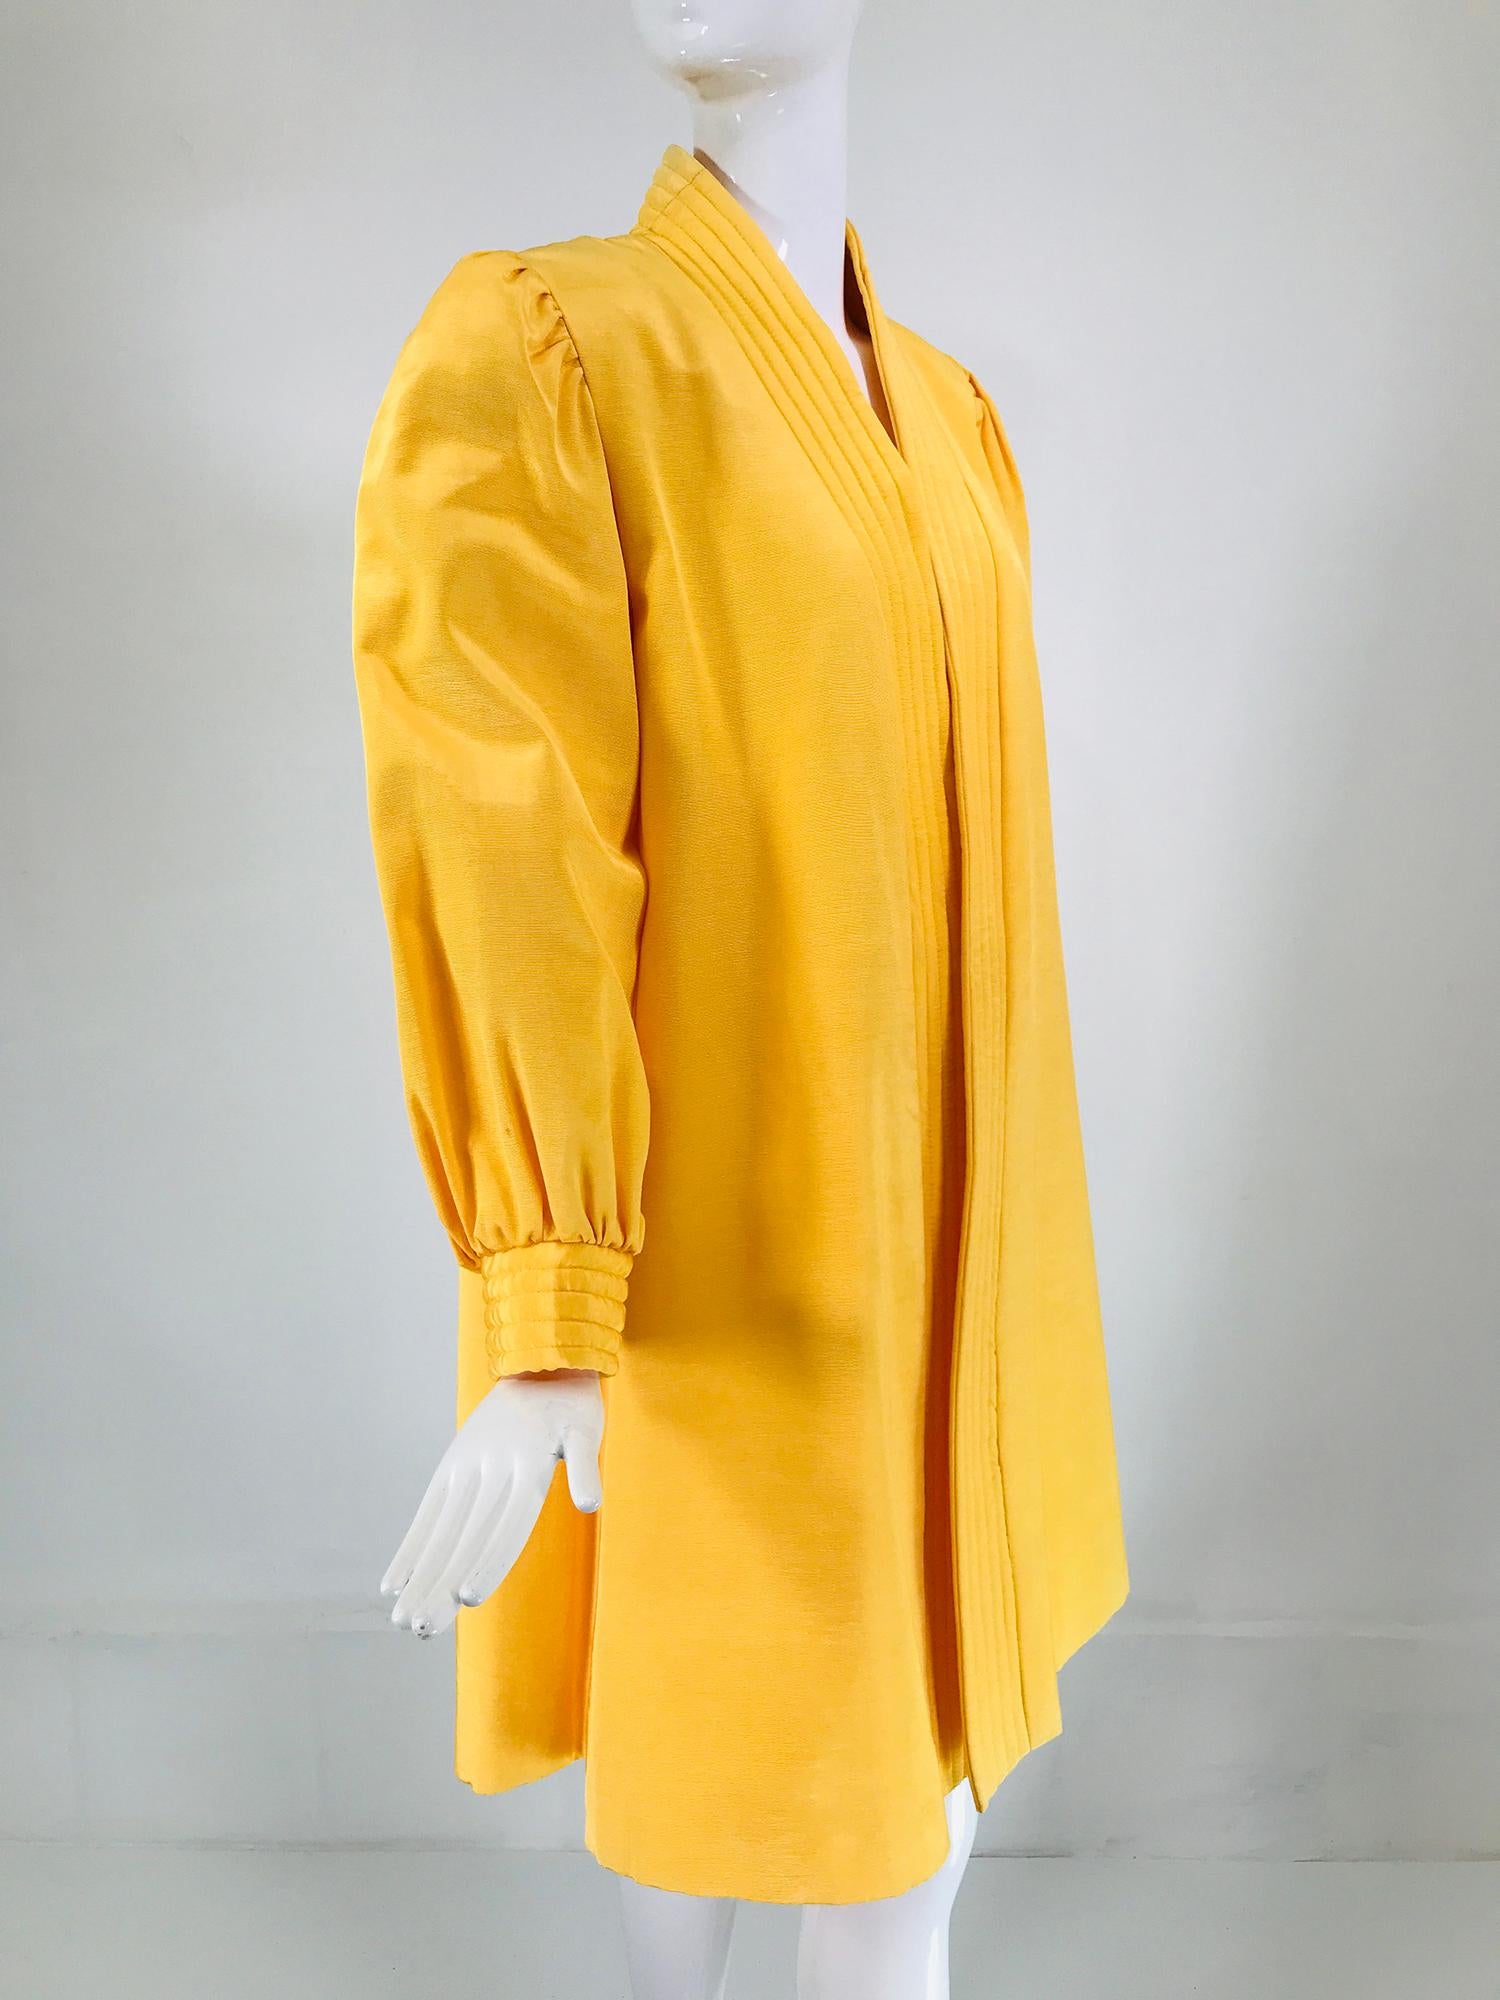 Victor Costa Mustard Yellow Faille Coat Quilted Facings & Cuffs 1980s For Sale 6